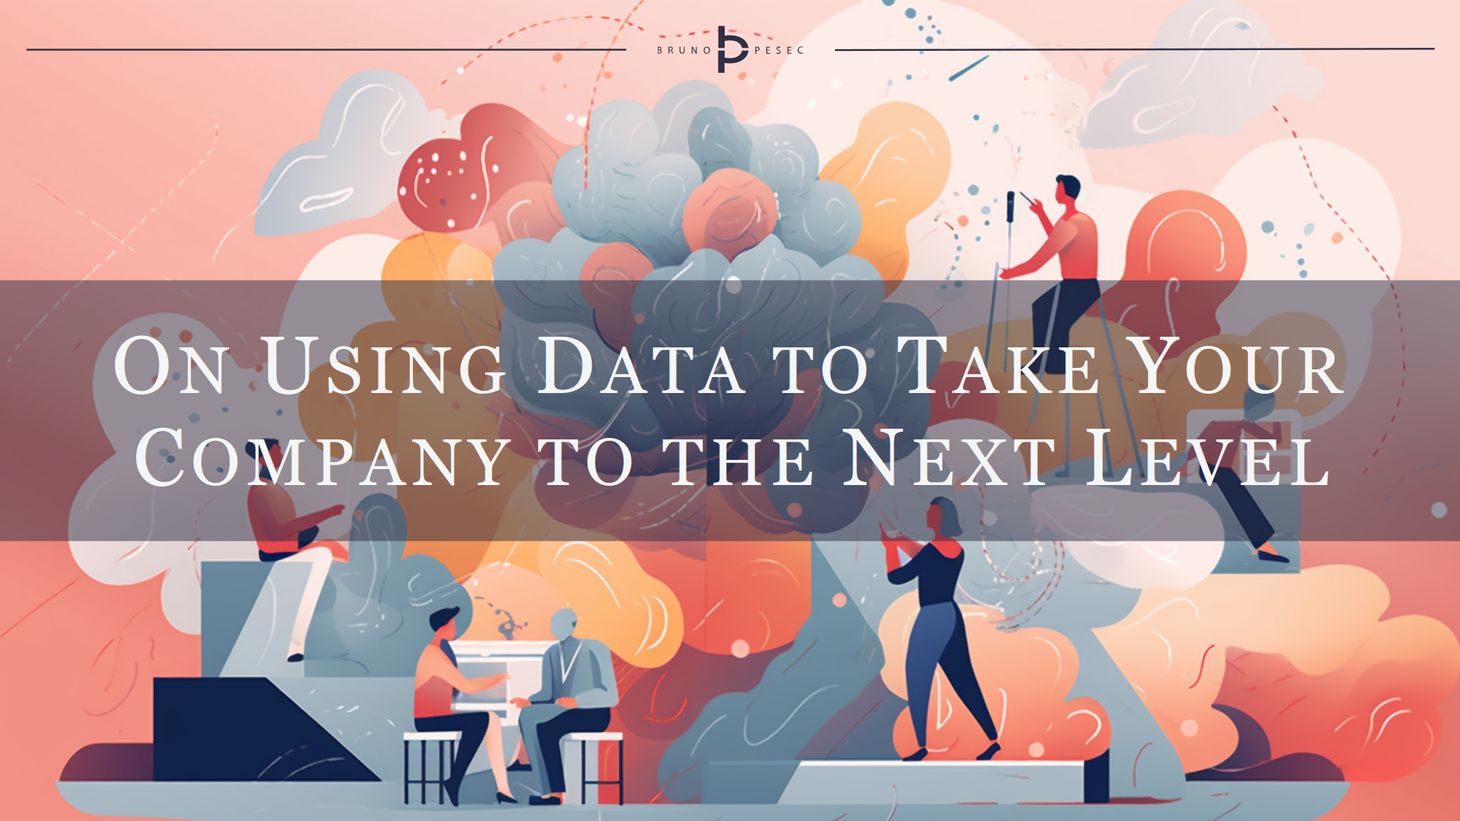 On using data to take your company to the next level